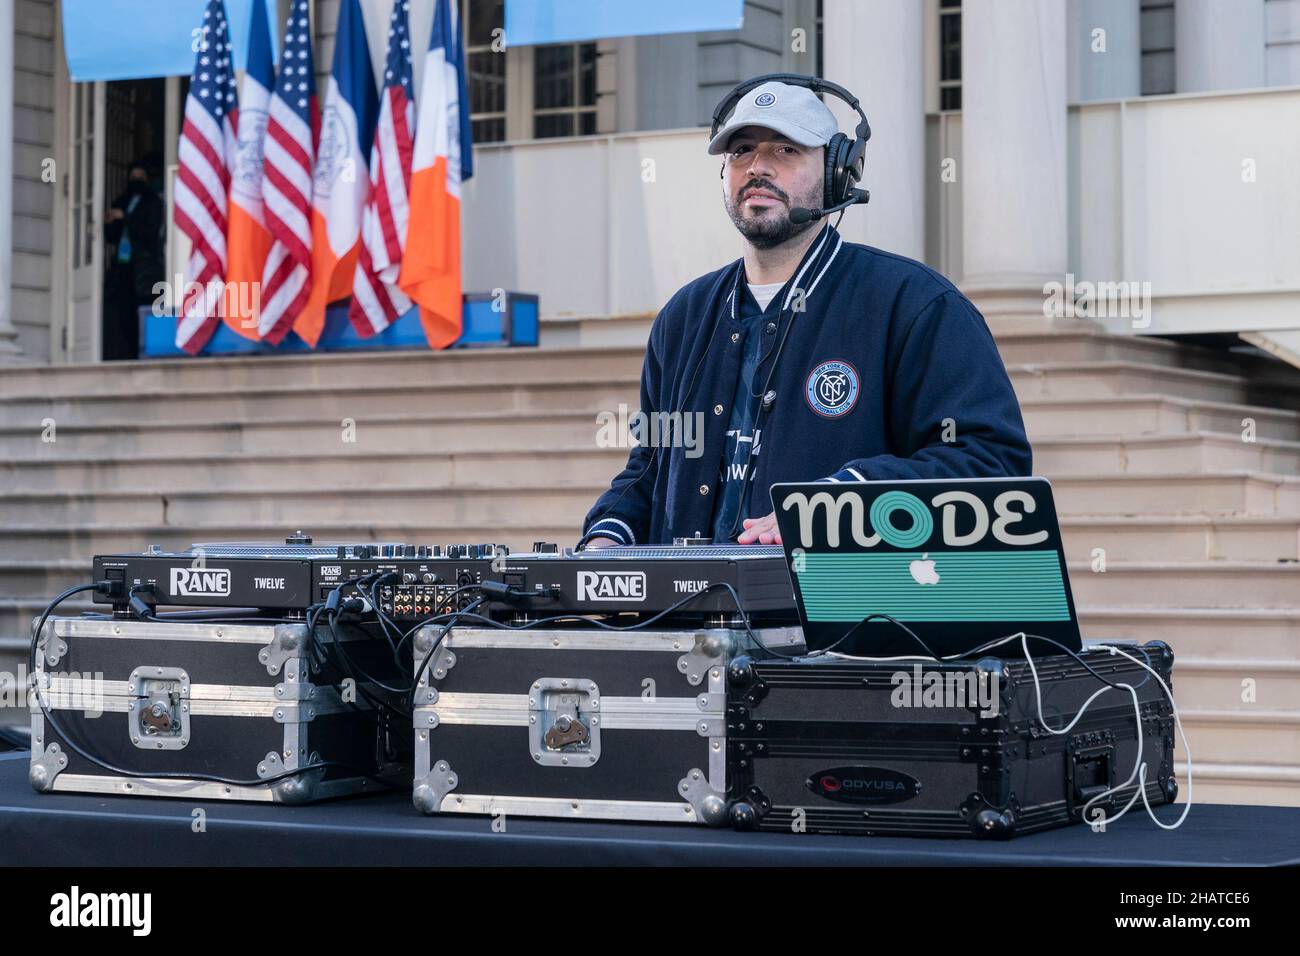 New York, USA. 14th Dec, 2021. DJ Mode performs during celebration for NYCFC winning the 2021 MLS Cup on City Hall steps in New York on December 14, 2021. NYCFC finished the regular season in 4th place and played almost all playoff games away. Winning the MLS Cup is the first trophy won by the franchise since it was established 7 years ago. NYCFC is part of the City Football Group which owns football clubs around the world. (Photo by Lev Radin/Sipa USA) Credit: Sipa USA/Alamy Live News Stock Photo